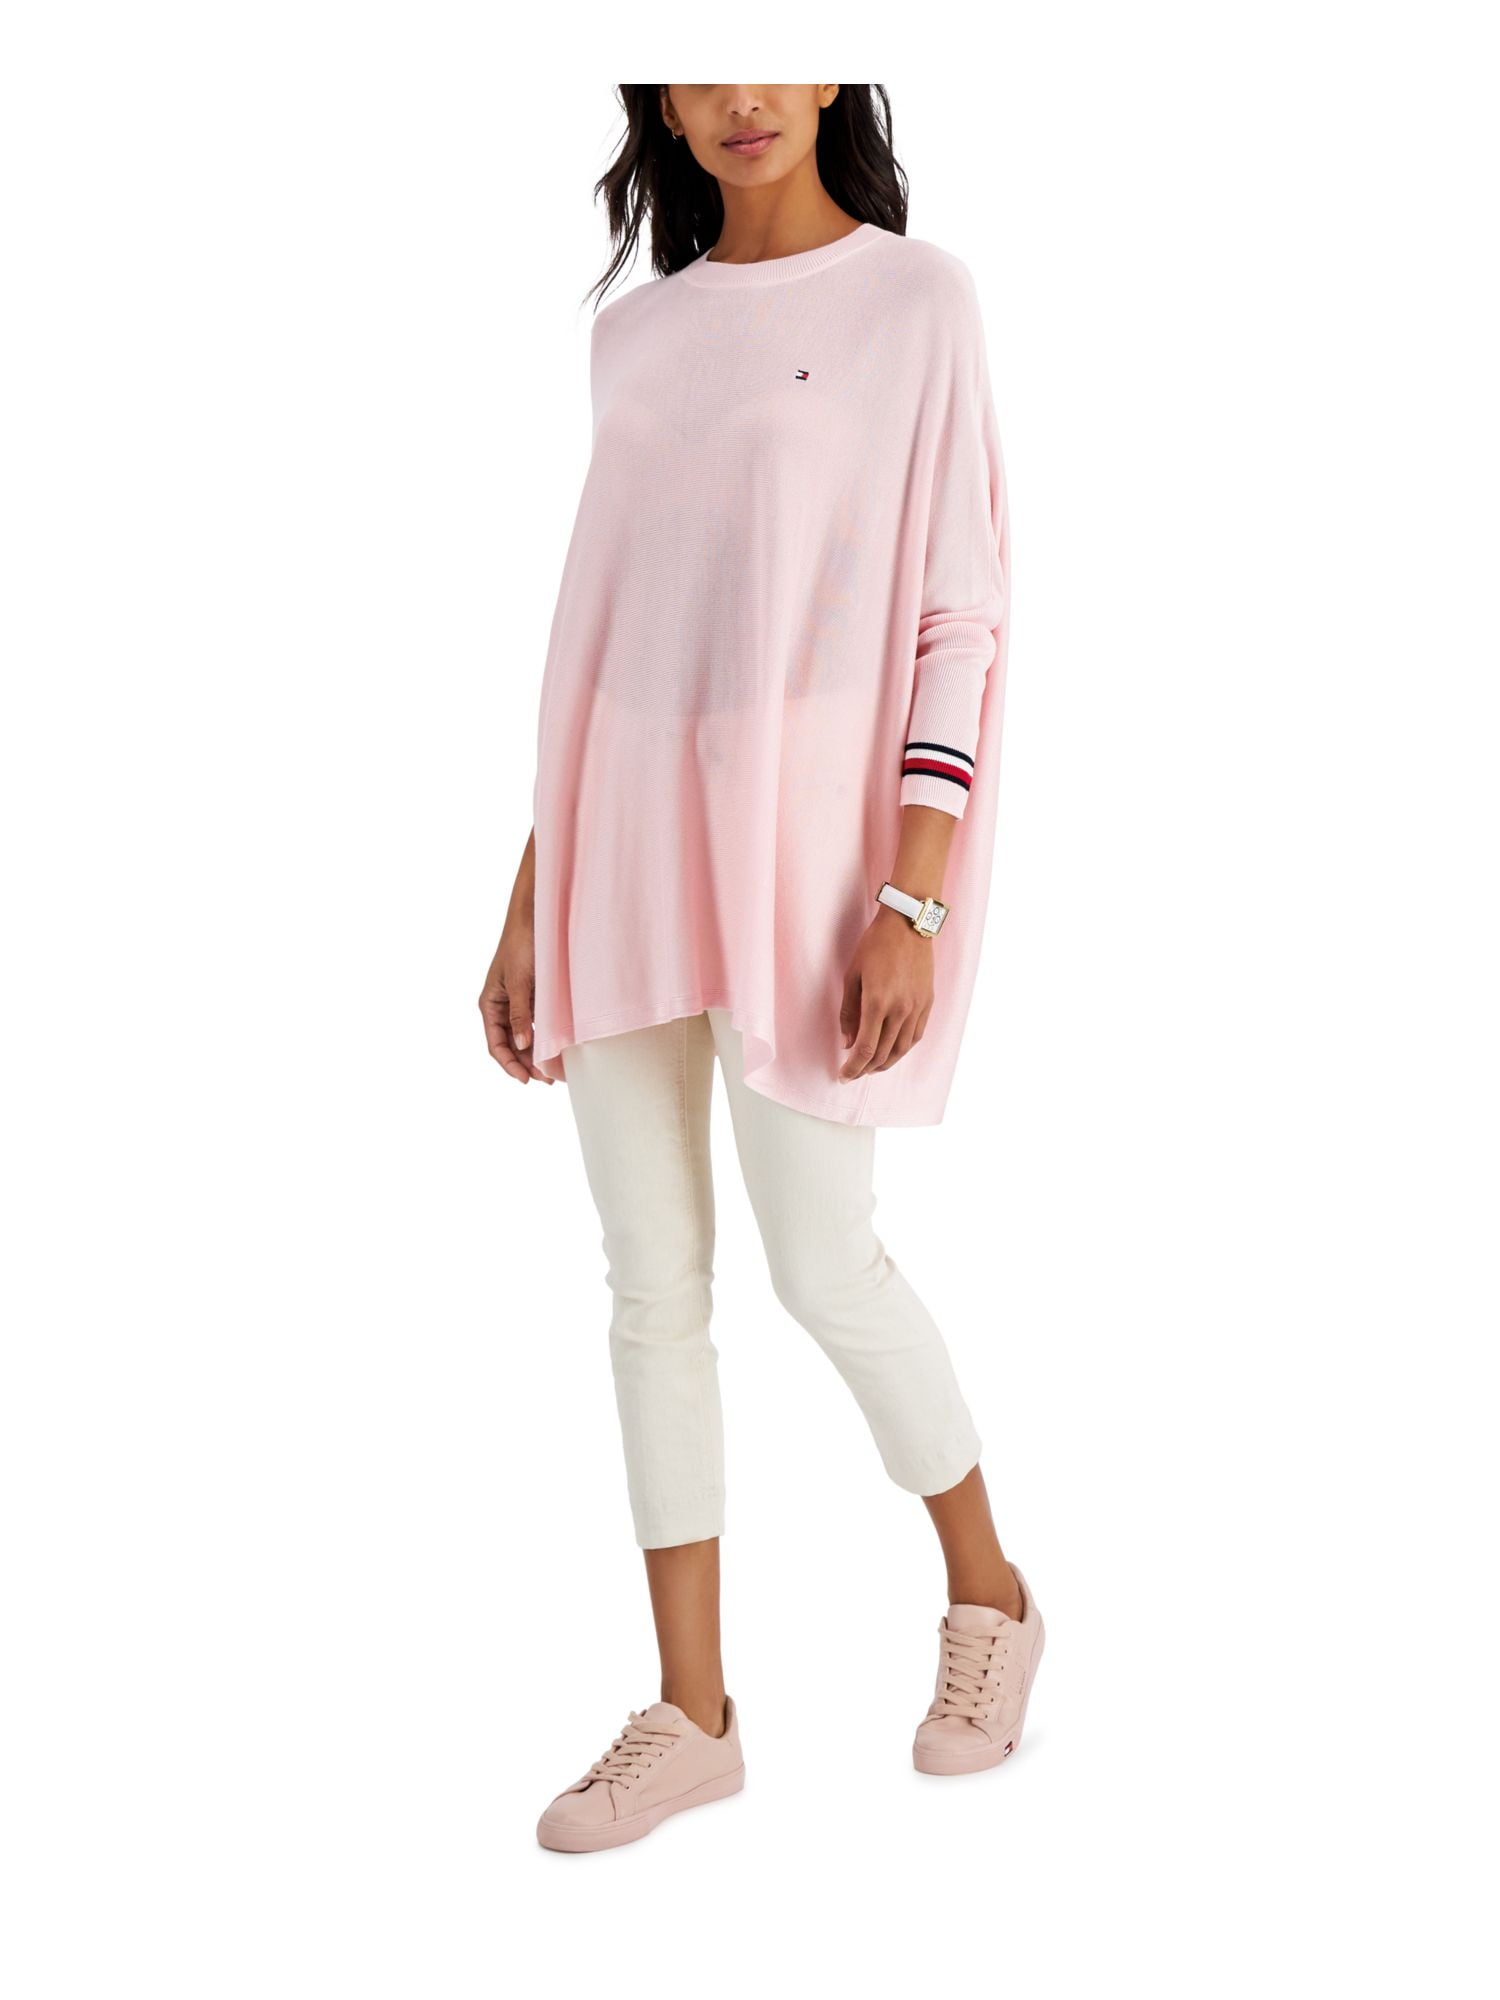 Gooey arsenal renhed TOMMY HILFIGER Womens Pink Stretch Ribbed Long Sleeve Crew Neck PONCHO  Sweater L\XL - Walmart.com